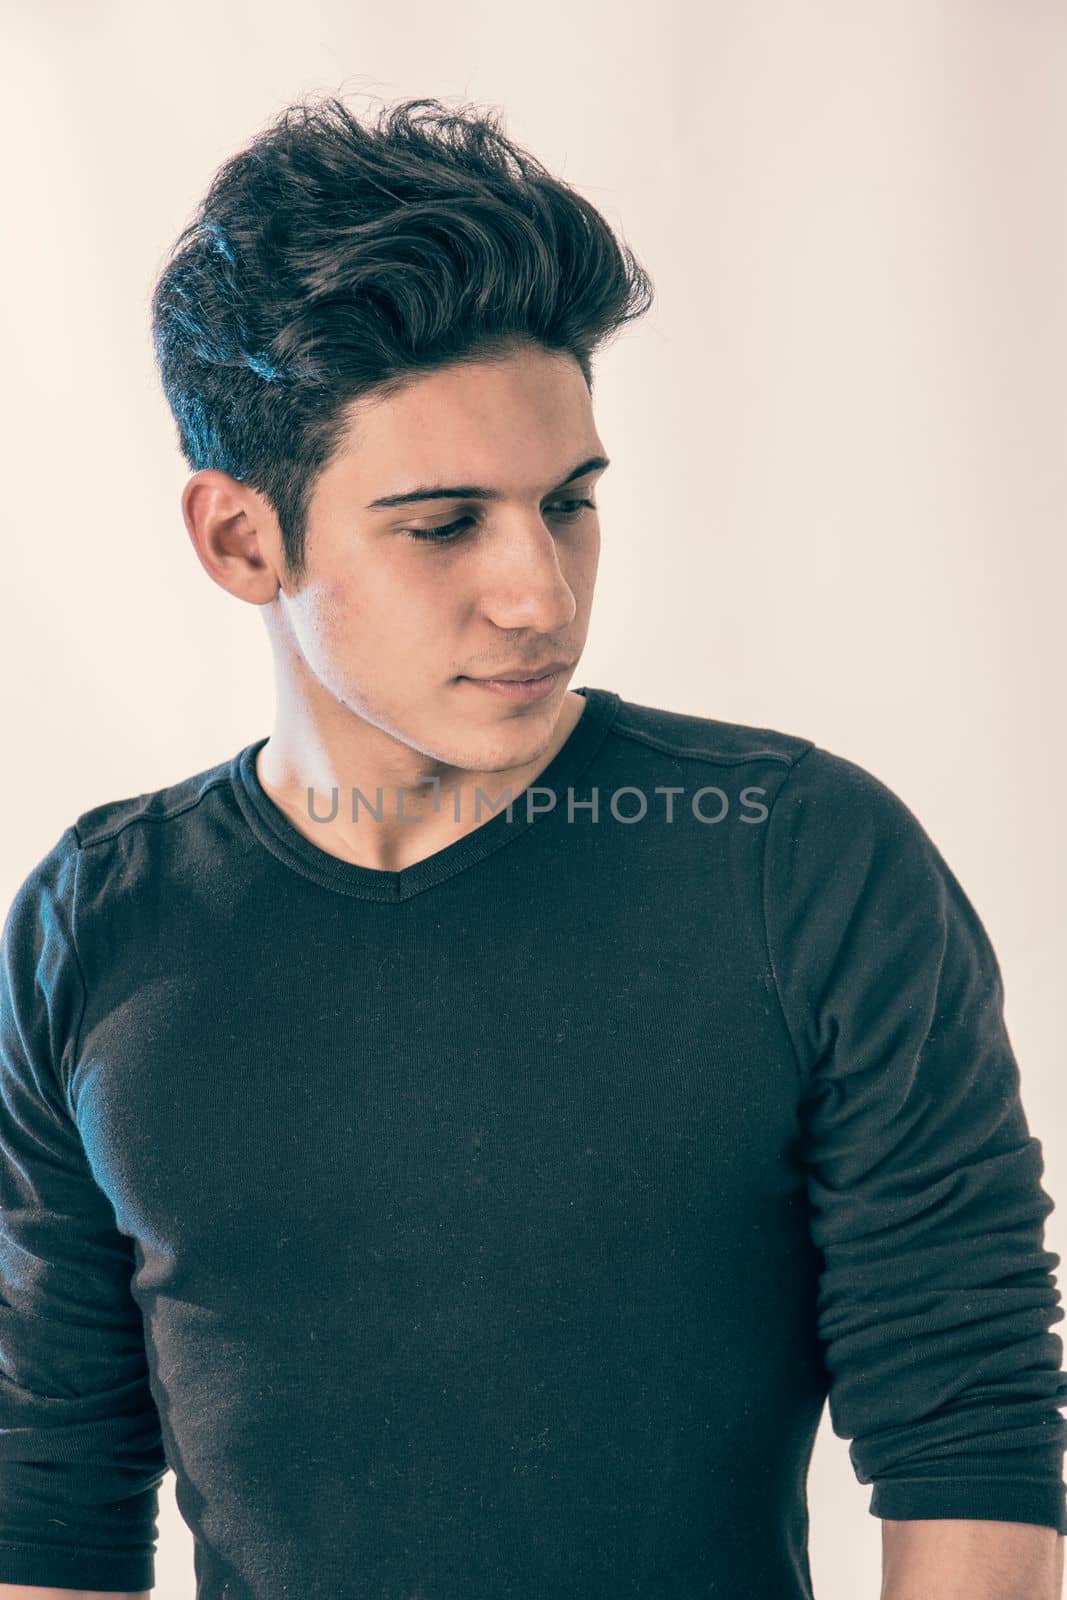 Handsome and fit young man standing on white background by artofphoto